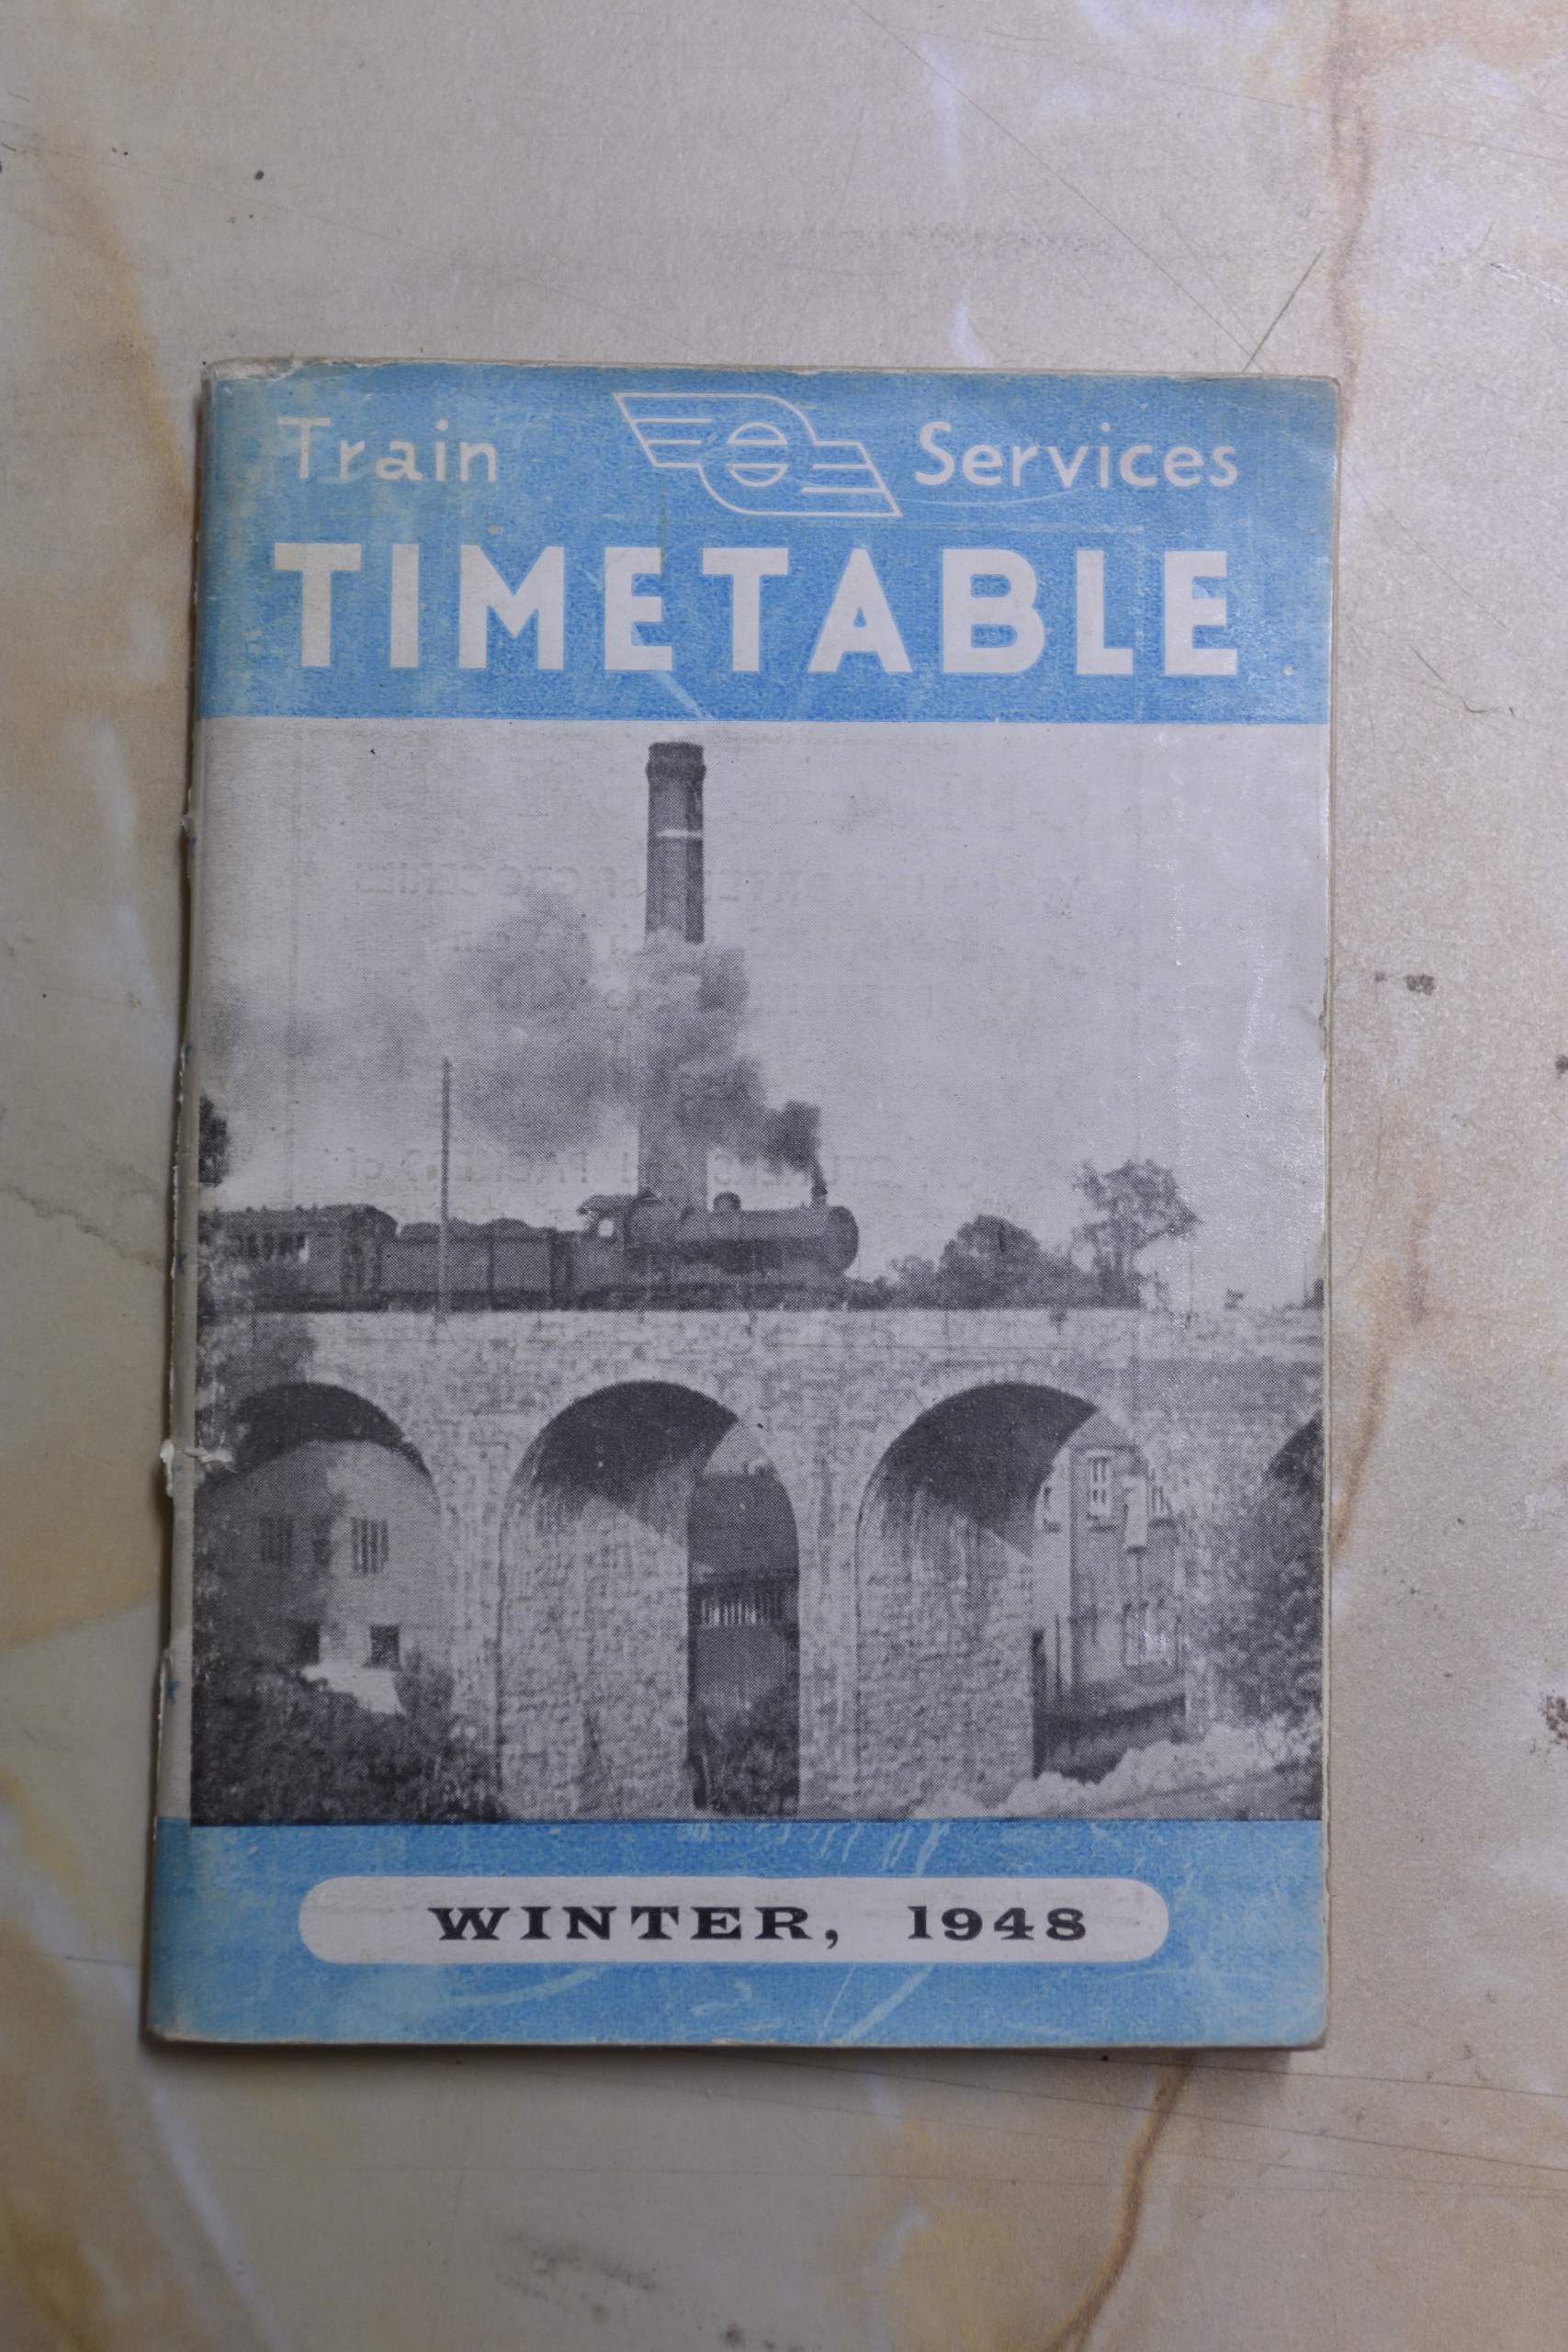 Winter, 1948 Train Services Timetable